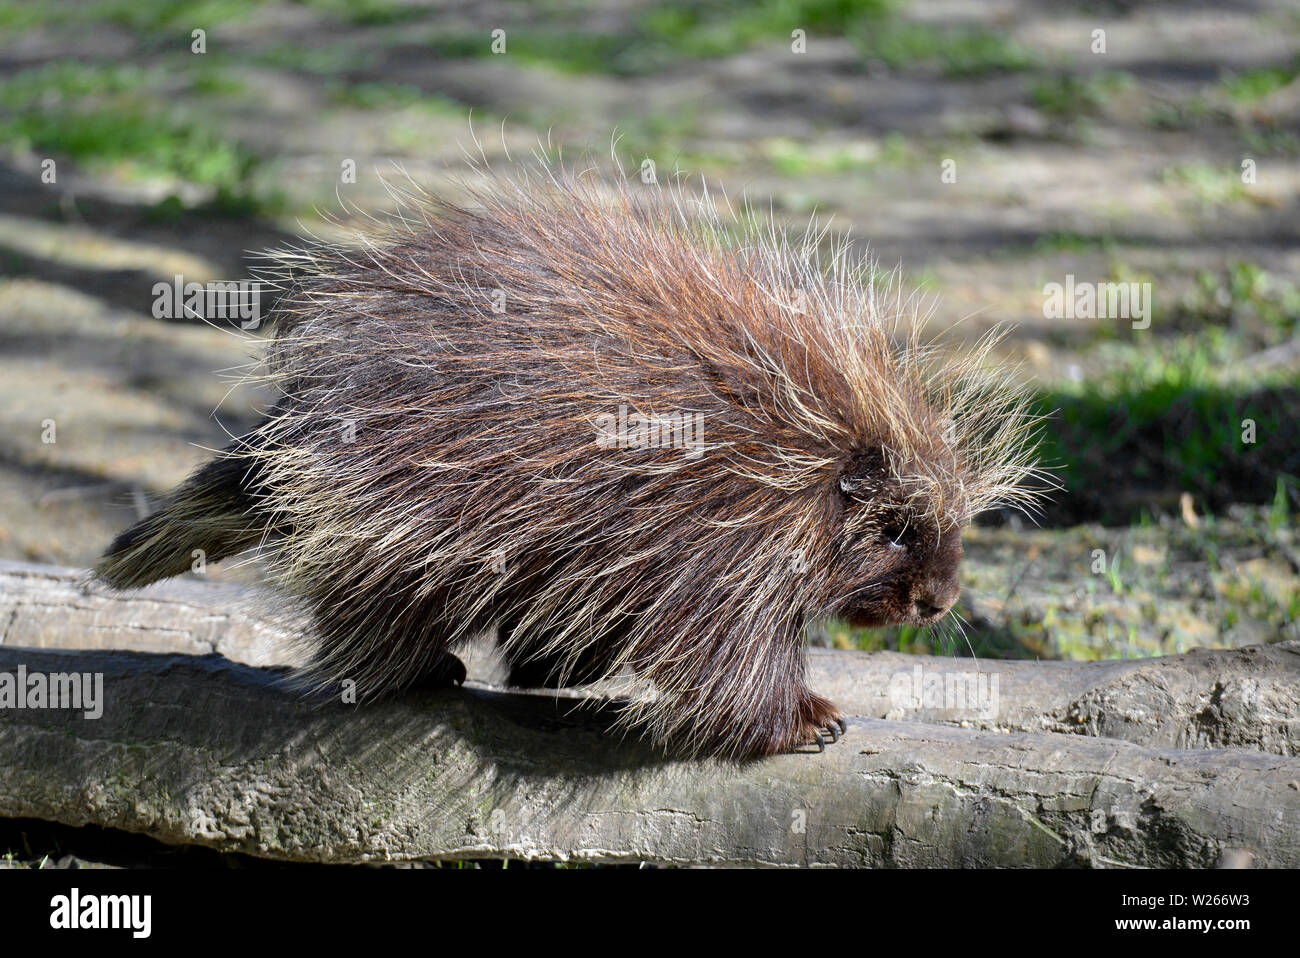 The North American porcupine (Erethizon dorsatum), also known as the Canadian porcupine or common porcupine, seen from profile Stock Photo